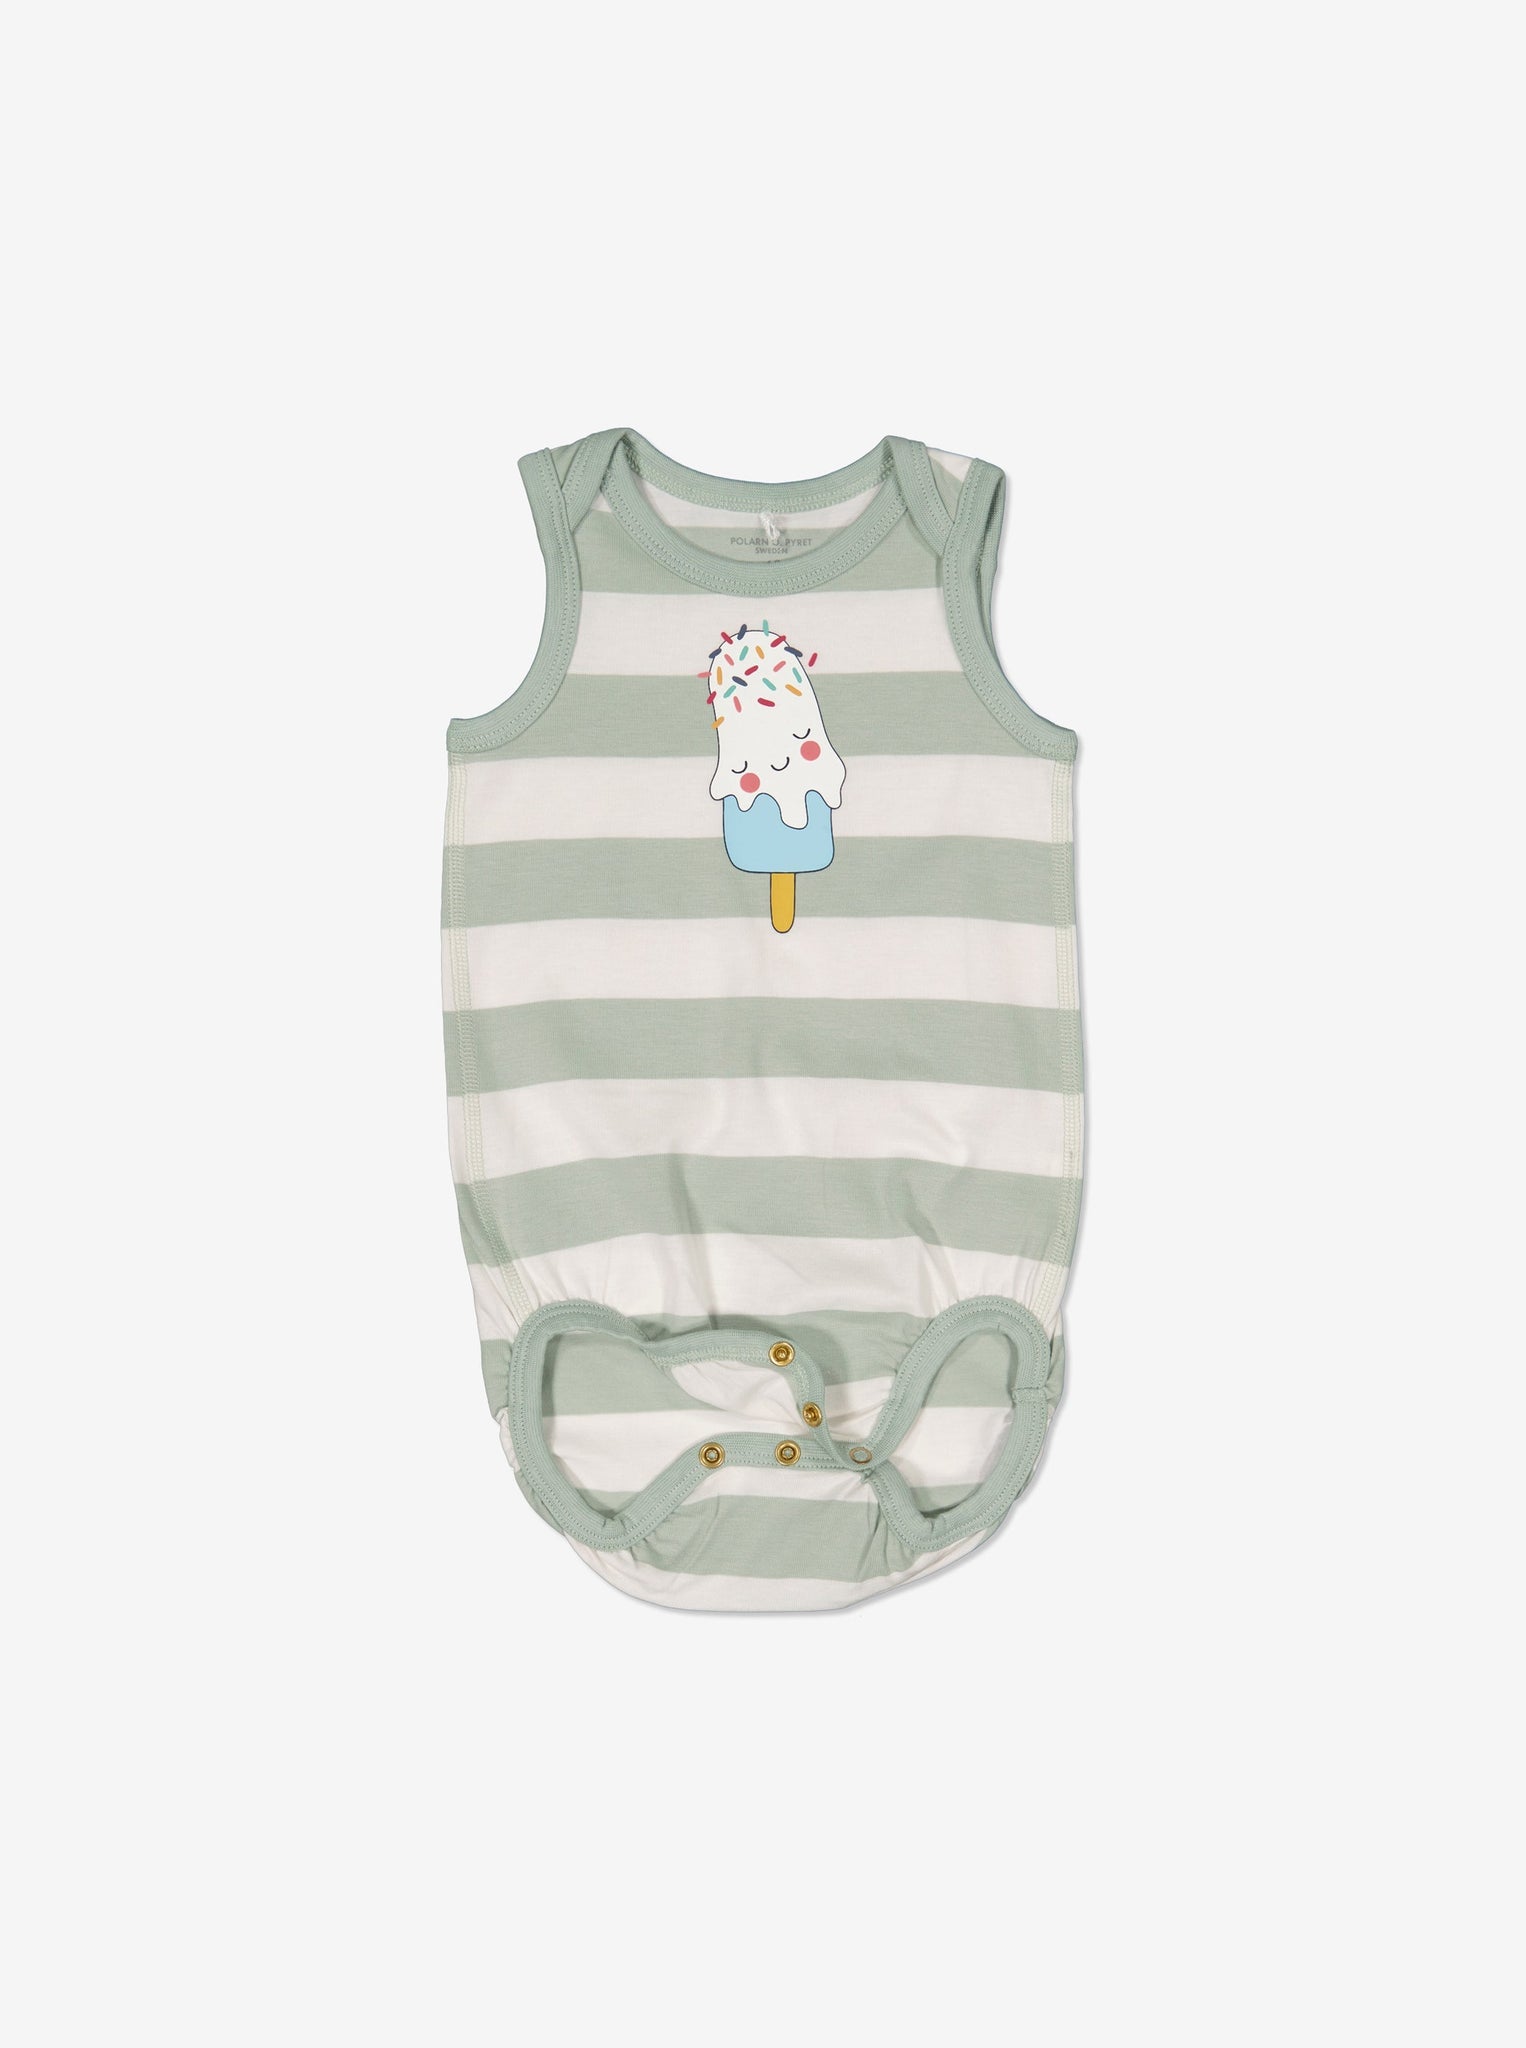 Green Sleeveless Newborn Babygrow from Polarn O. Pyret Kidswear. Made using sustainable sourced materials.